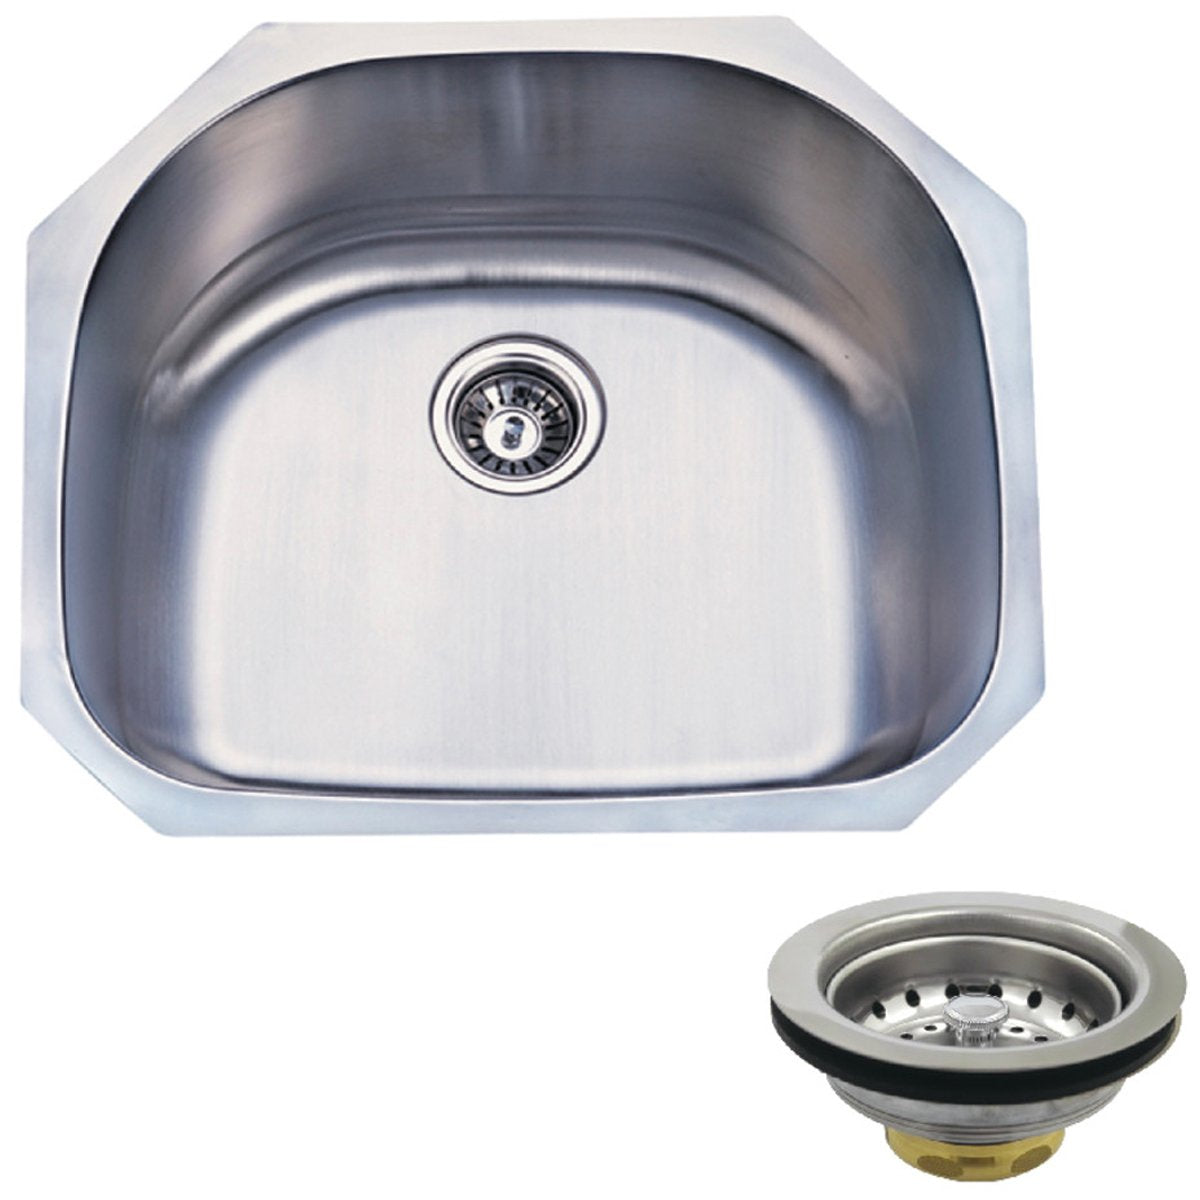 Kingston Brass Undermount Stainless Steel Single Bowl Kitchen Sink Combo with Strainer